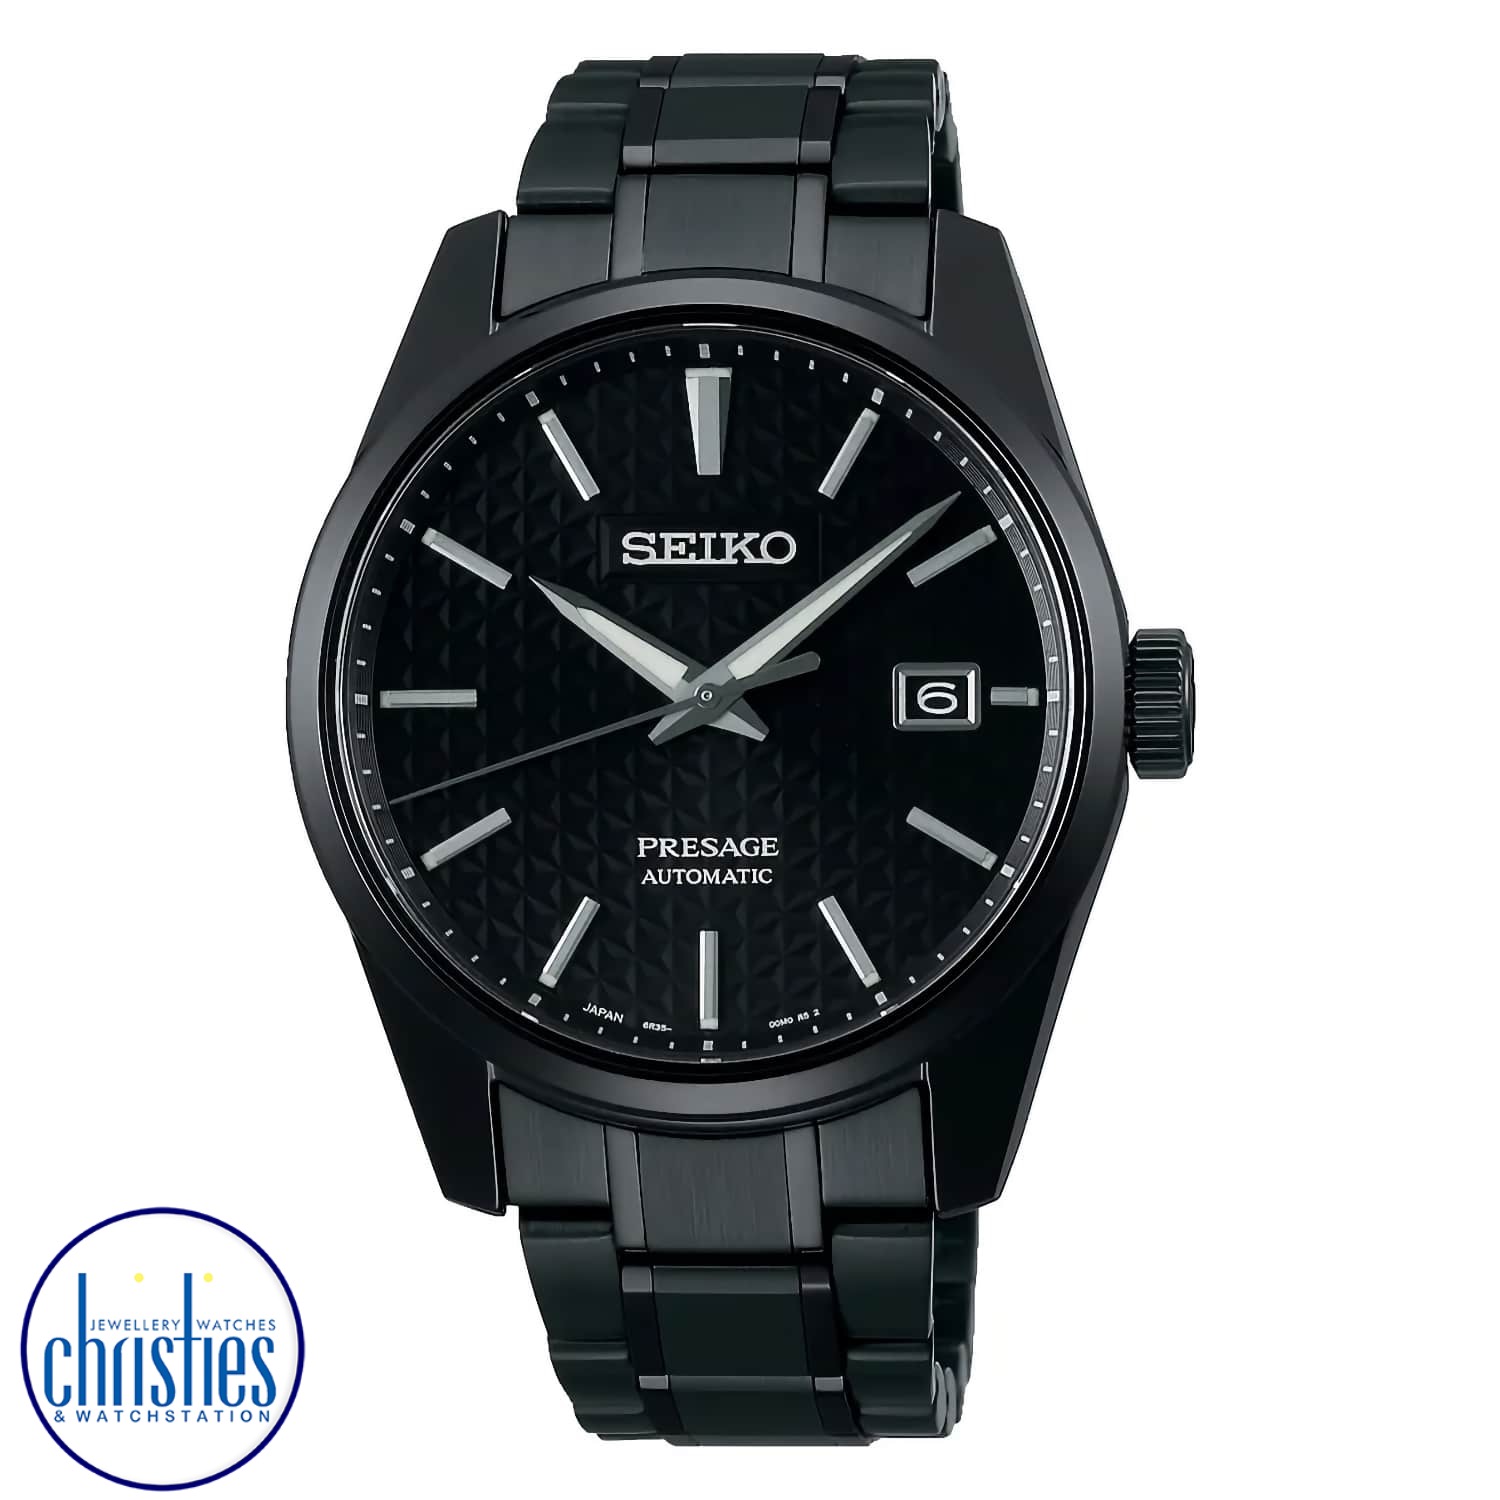 SPB229J1 Seiko Presage Sharp Edged Automatic Watch. This SPB227J1 is from the Seiko Presage Sharp Edged collection, inspired by ancient and modern Japanese design. The dials on Presage Sharp Edged timepieces feature a traditional Japanese pattern designed